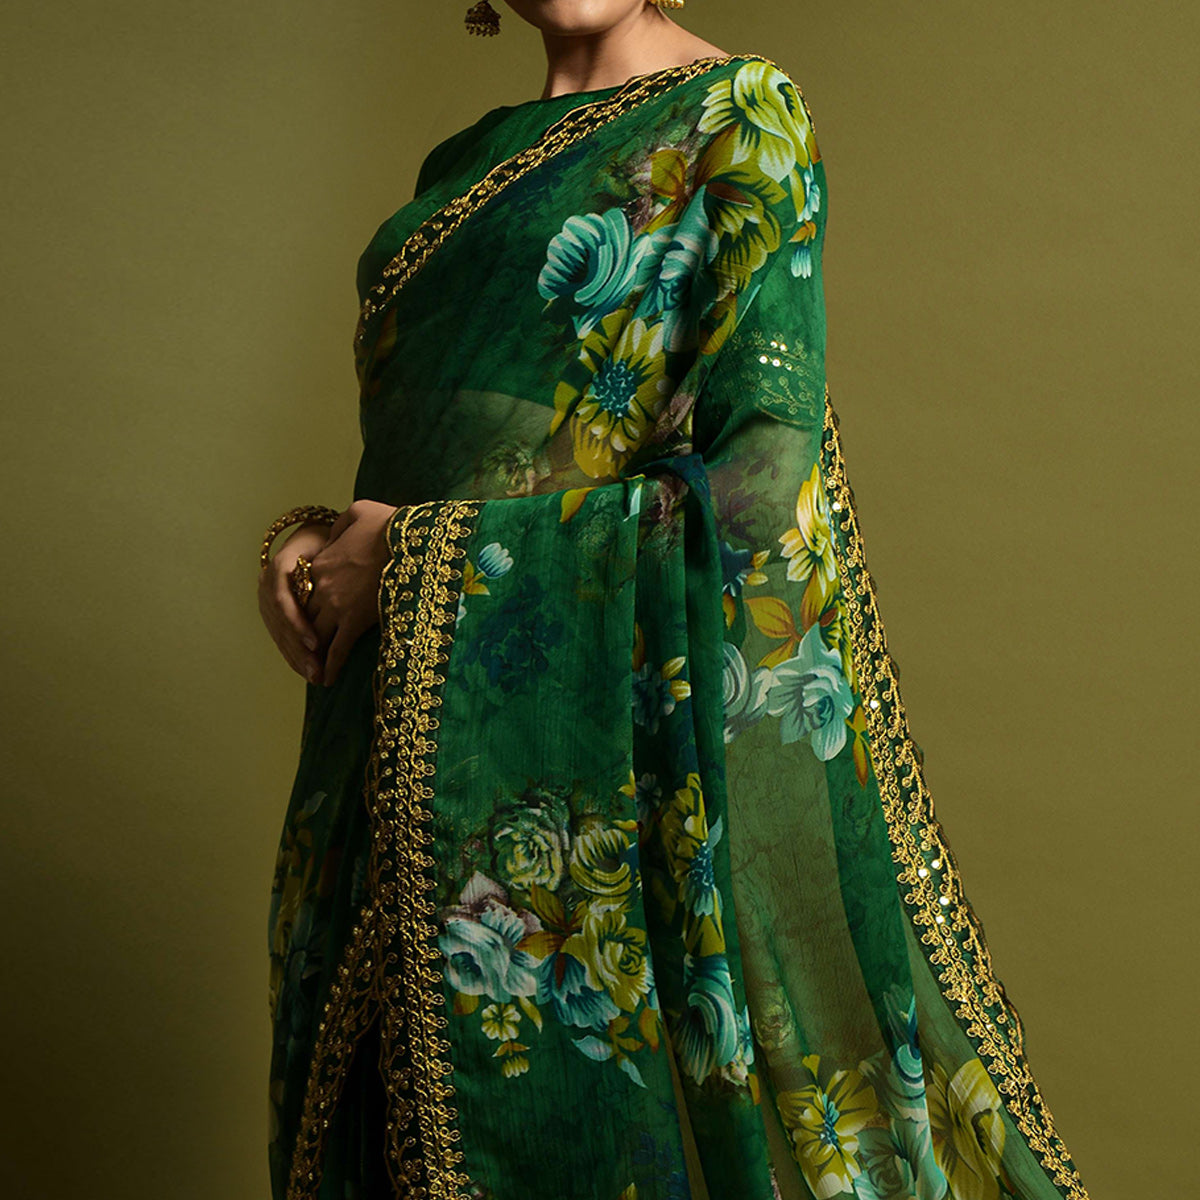 Green Floral Printed Georgette Saree With Embroidered Border